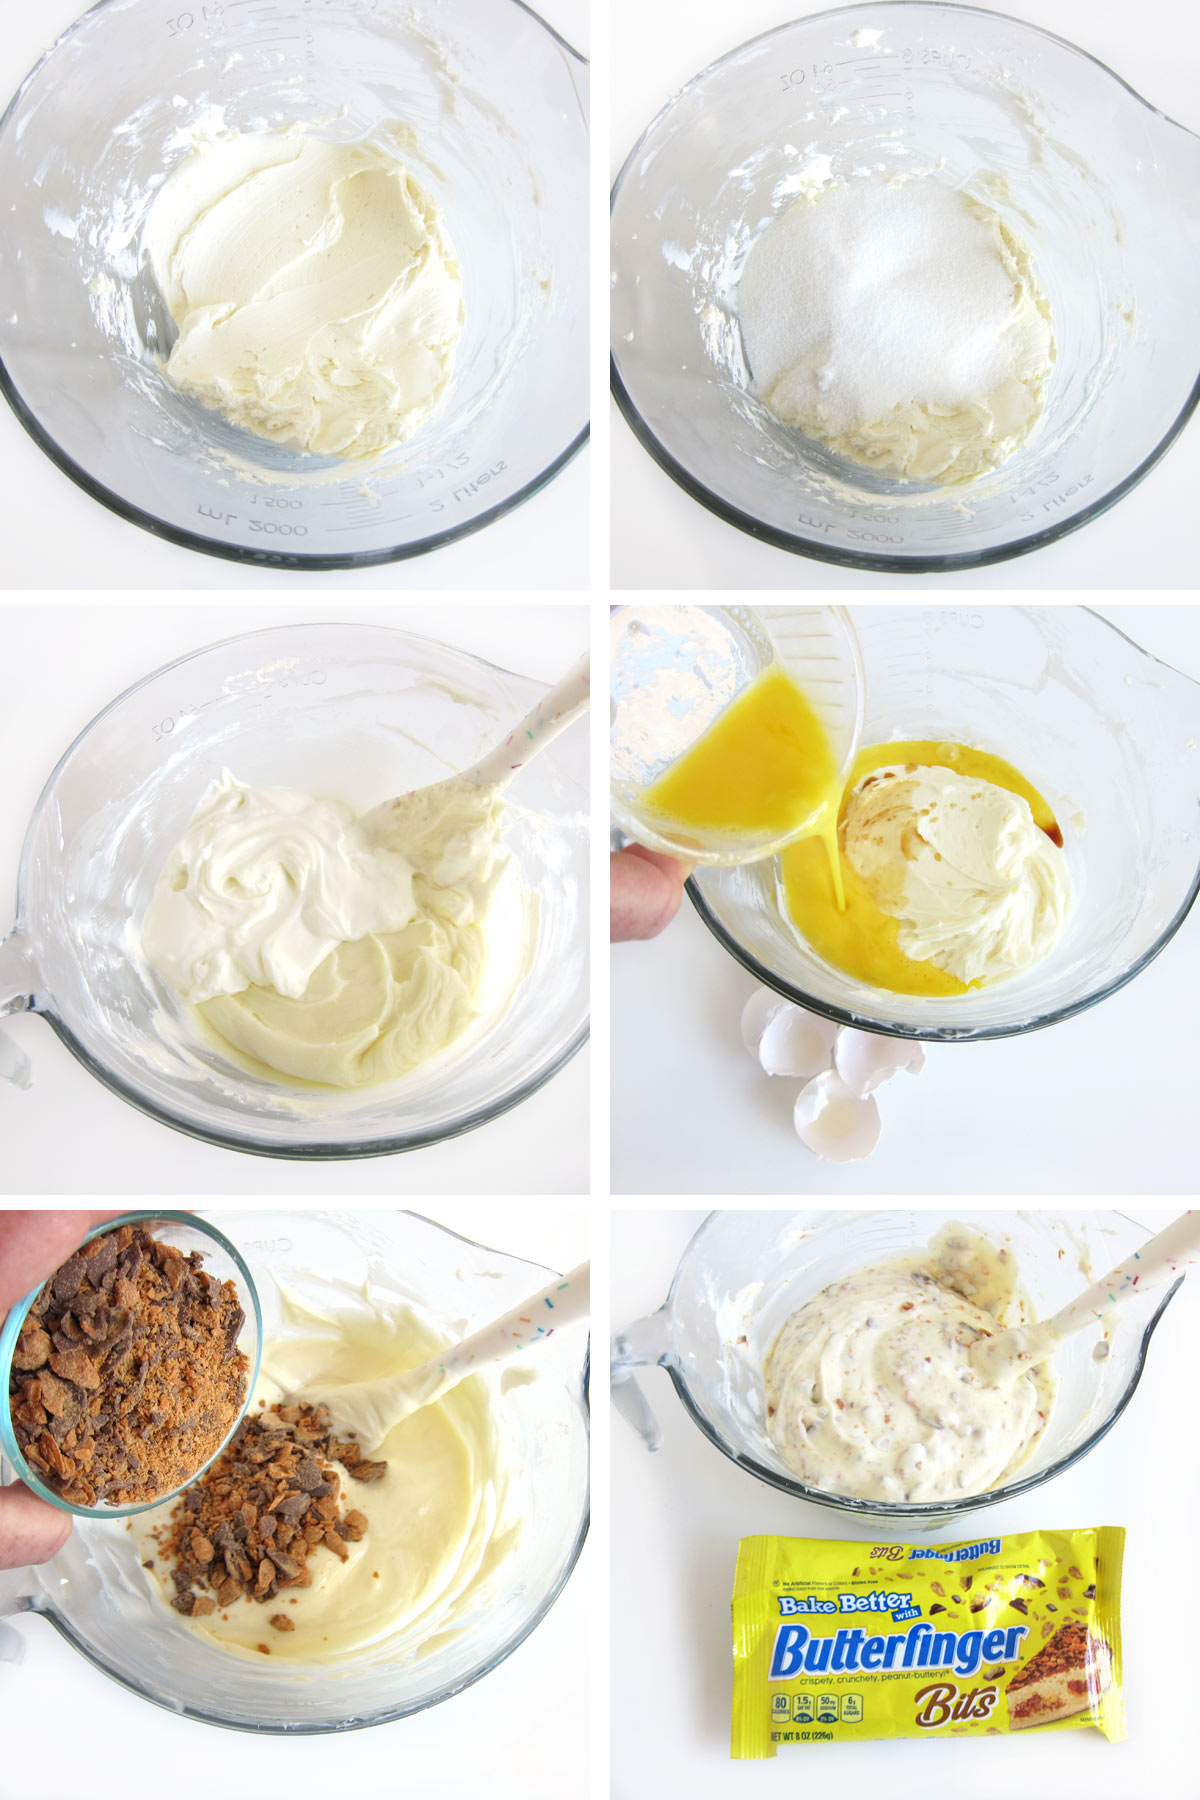 Blend cream cheese, sugar, sour cream, eggs, vanilla, and Butterfinger Baking Bits to make Butterfinger cheesecake filling.